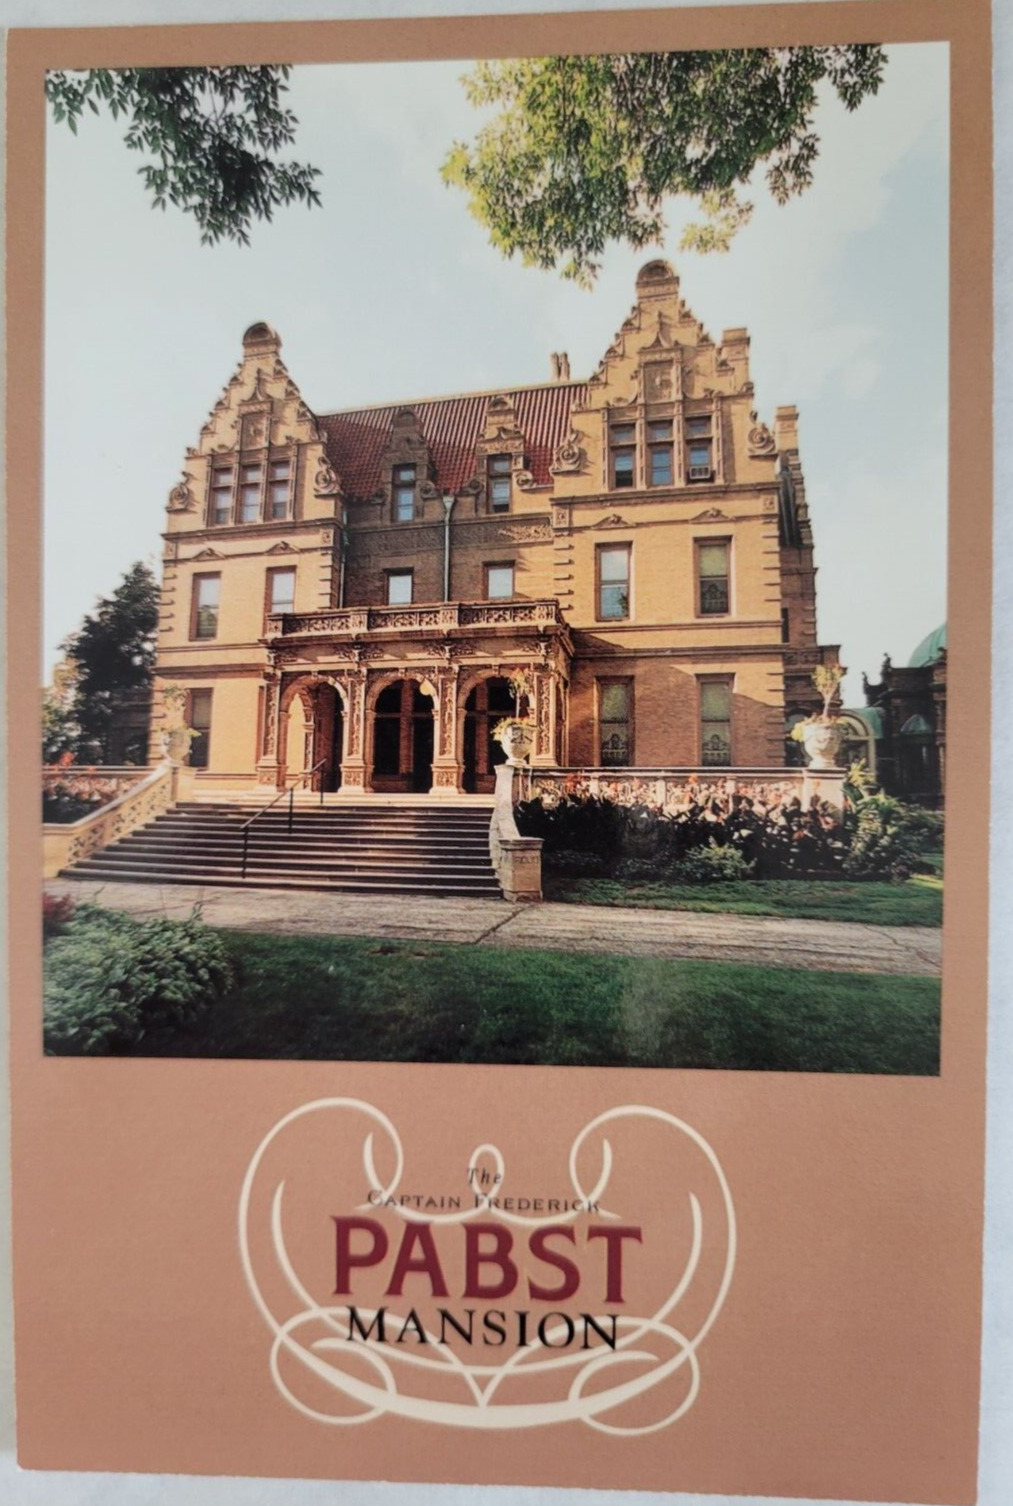 The Captain Frederick Pabst Mansion Milwaukee Wisconsin Postcard